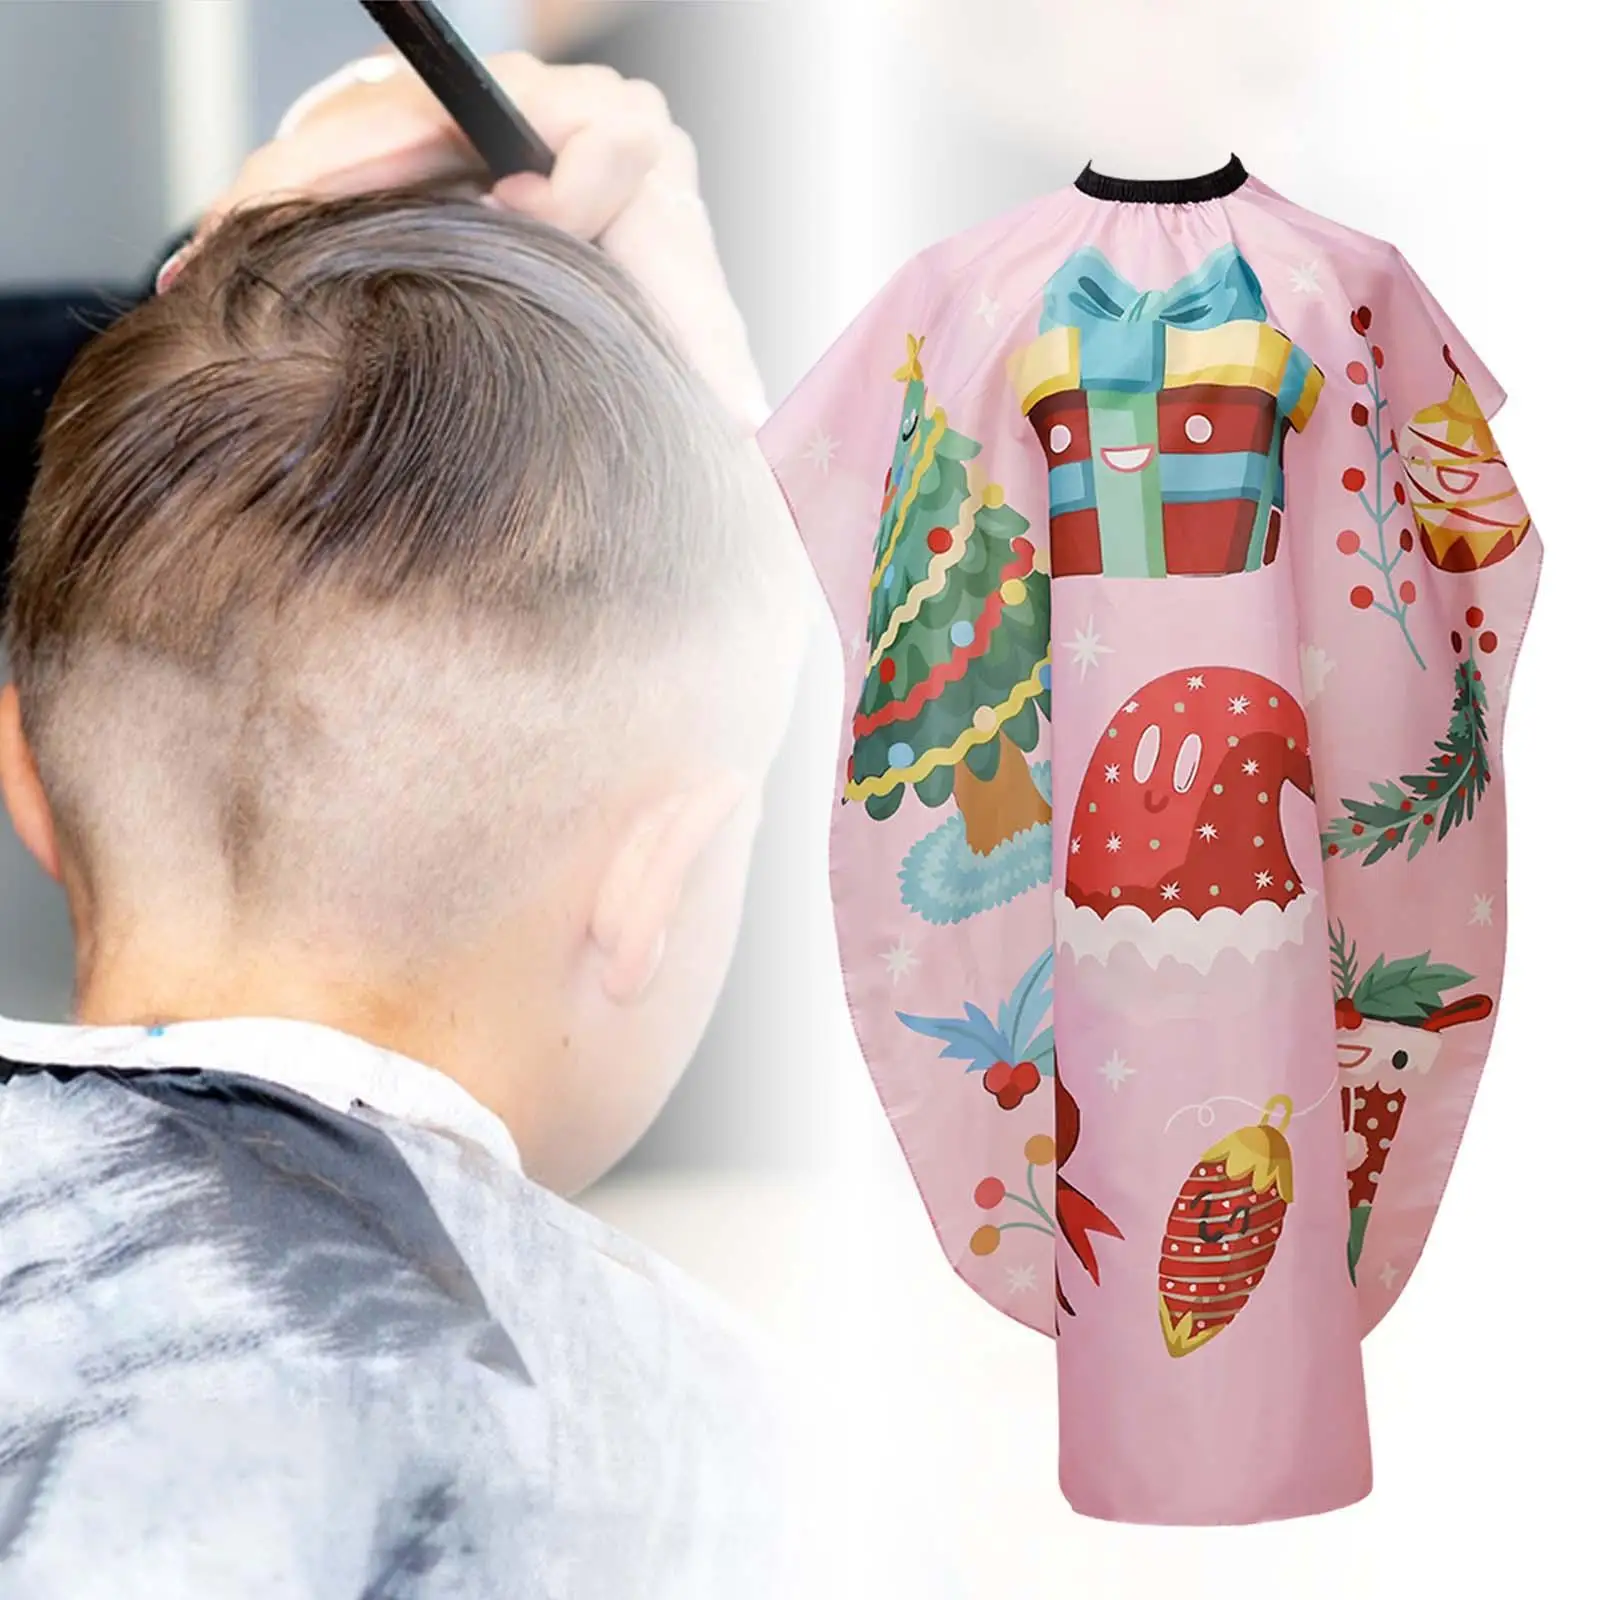 Child Hair Cutting Cape Easy to Lock Metal Clip Waterproof Cloth for Barber Shop with Adjustable Neckline Kids Haircut Cape